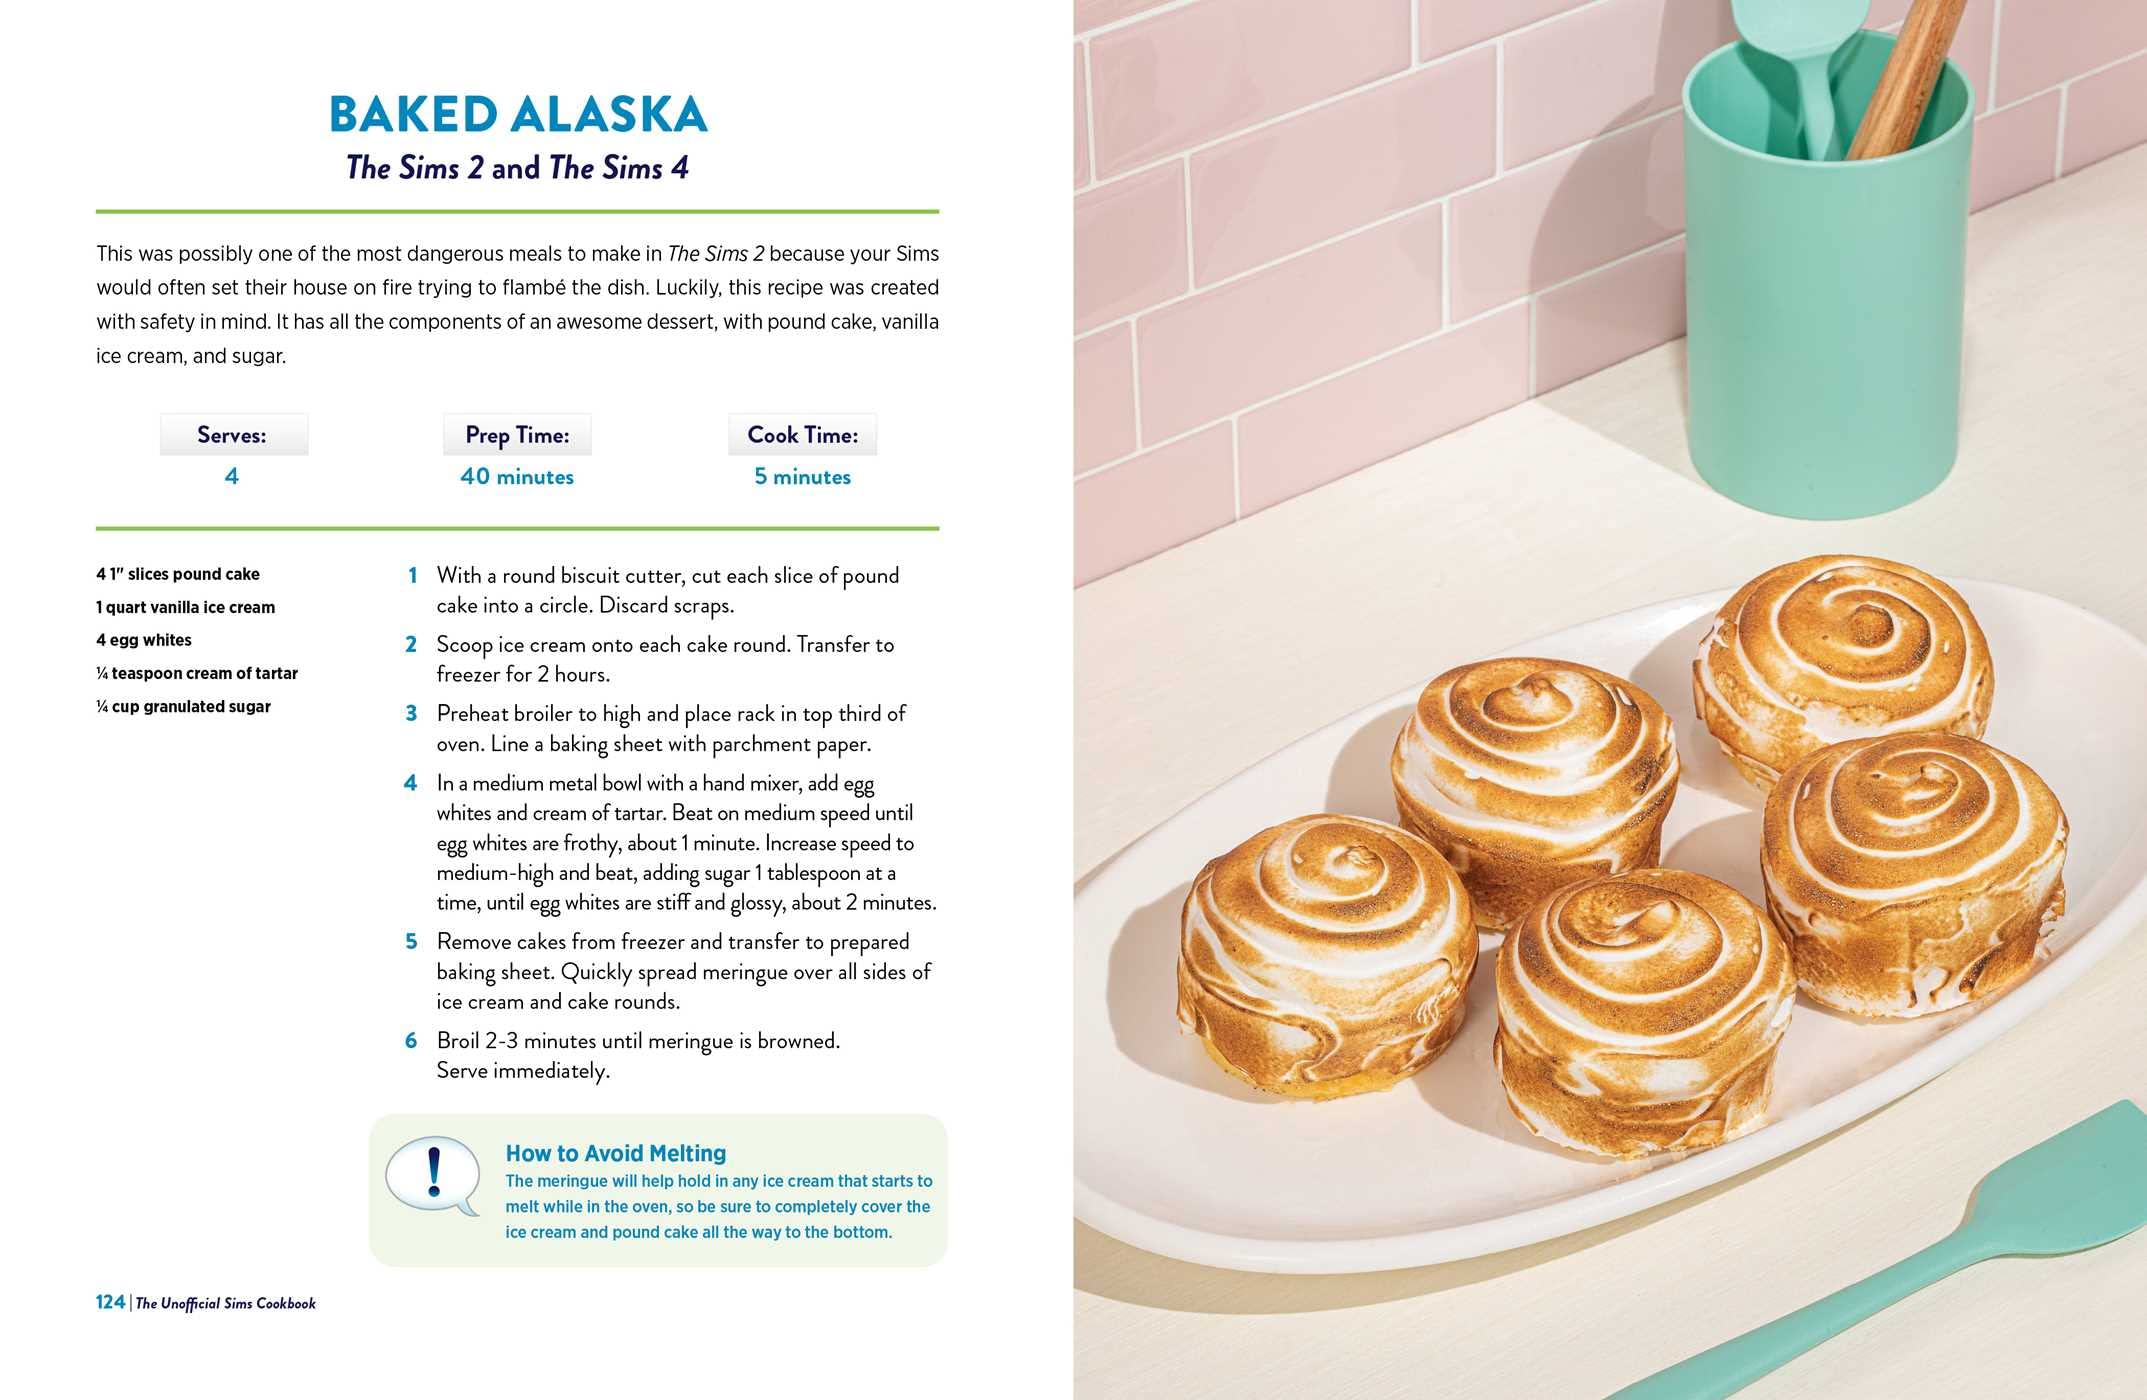 The Unofficial Sims Cookbook: From Baked Alaska to Silly Gummy Bear Pancakes, 85+ Recipes to Satisfy the Hunger Need (Unofficial Cookbook)